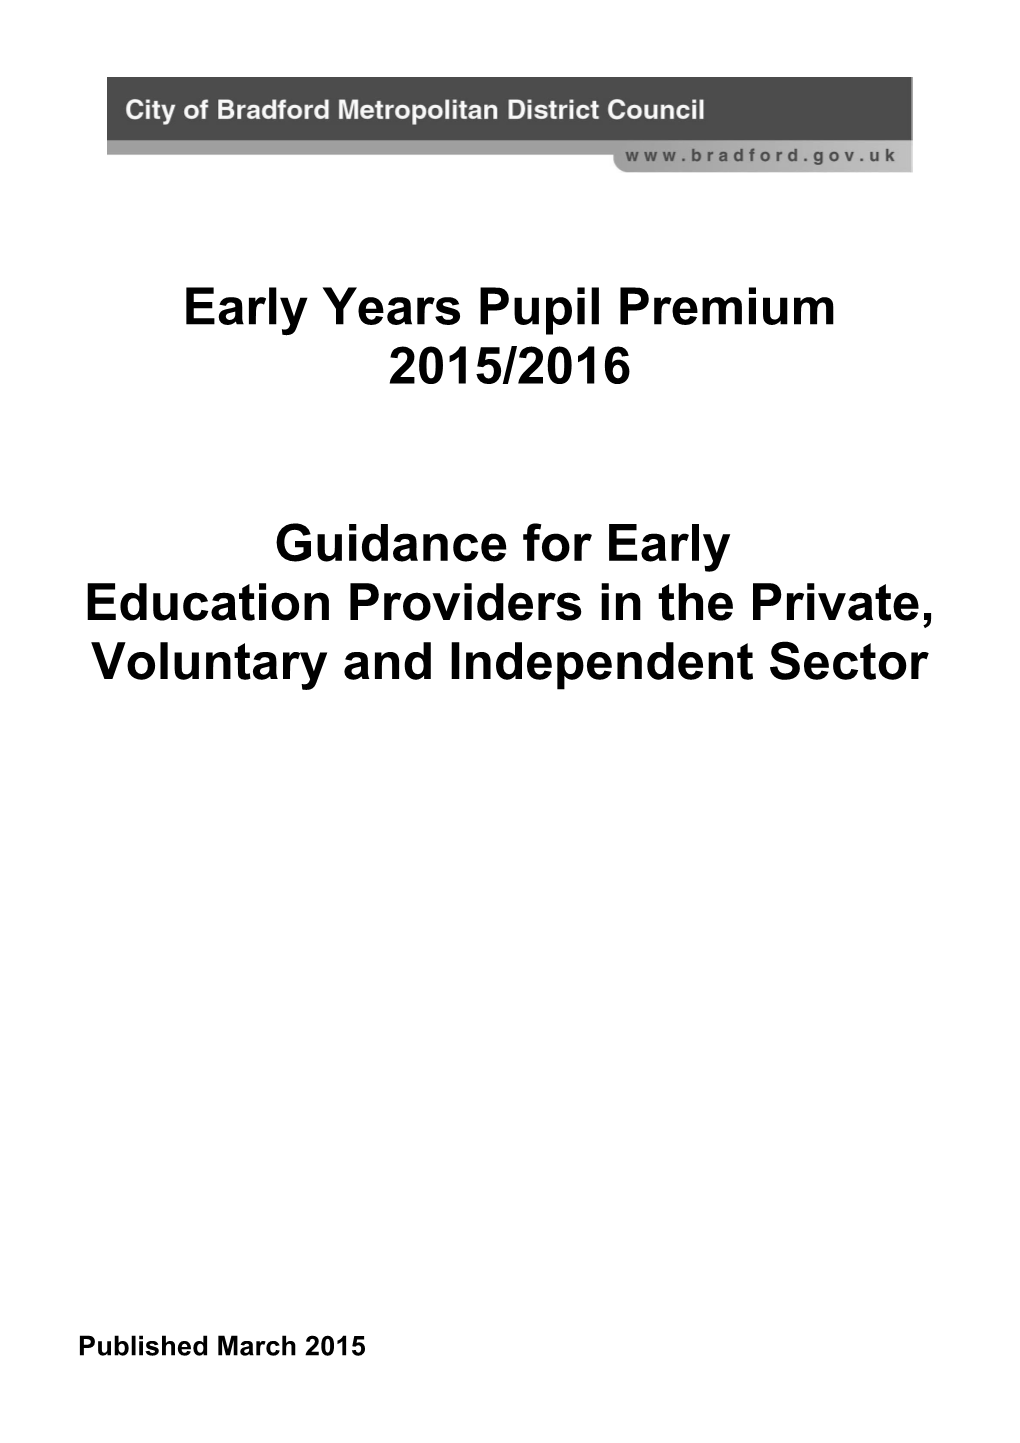 Early Years Pupil Premium 2015/2016